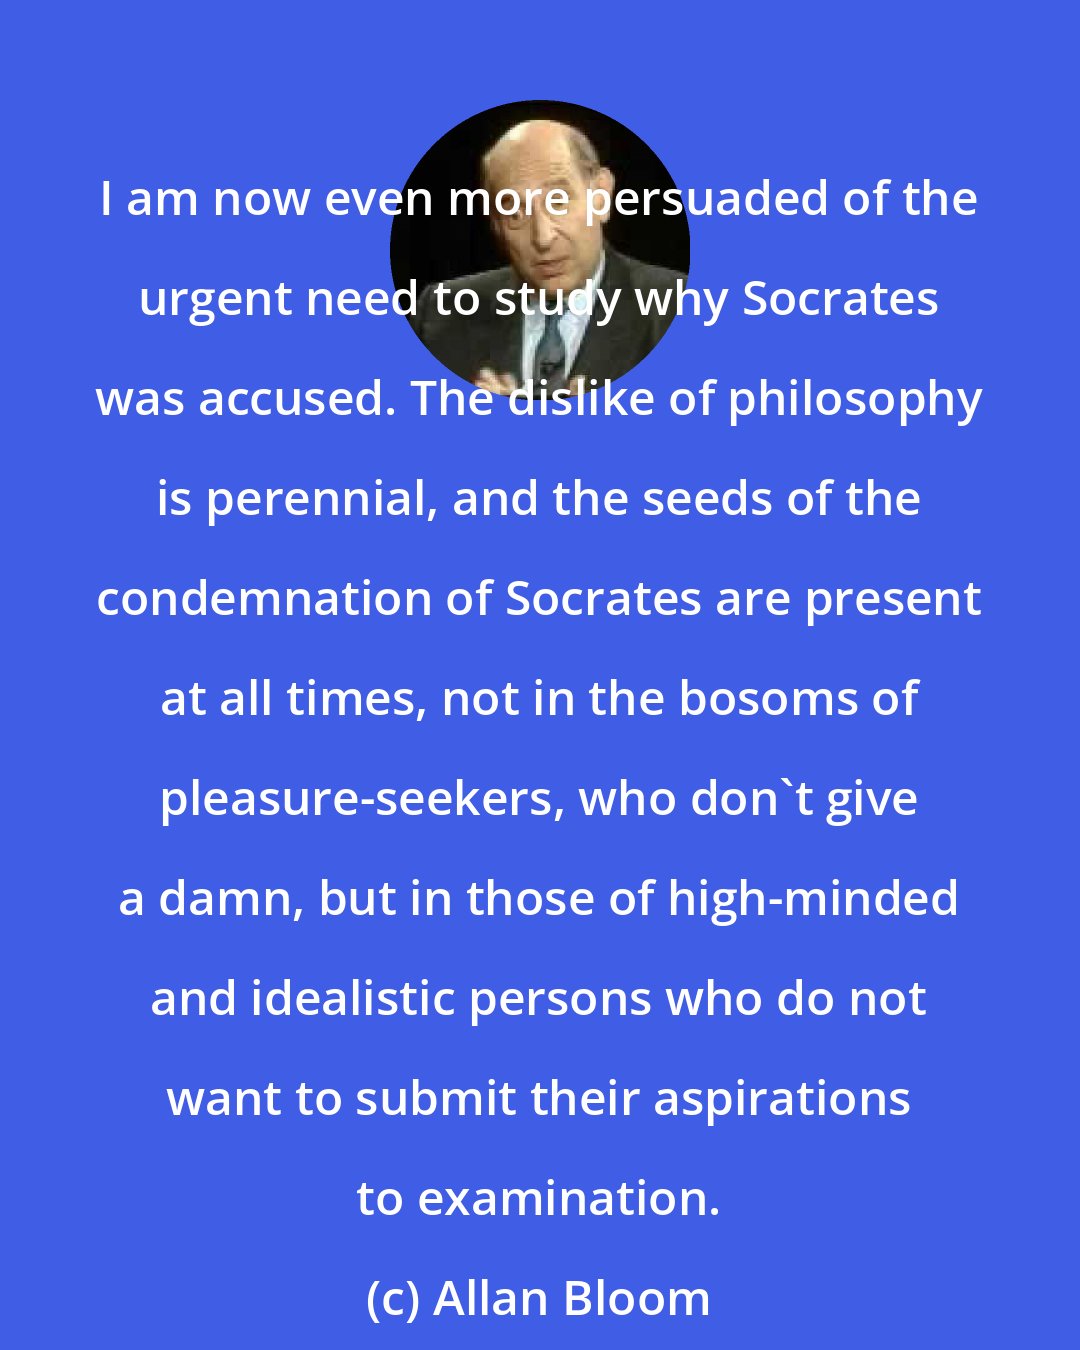 Allan Bloom: I am now even more persuaded of the urgent need to study why Socrates was accused. The dislike of philosophy is perennial, and the seeds of the condemnation of Socrates are present at all times, not in the bosoms of pleasure-seekers, who don't give a damn, but in those of high-minded and idealistic persons who do not want to submit their aspirations to examination.